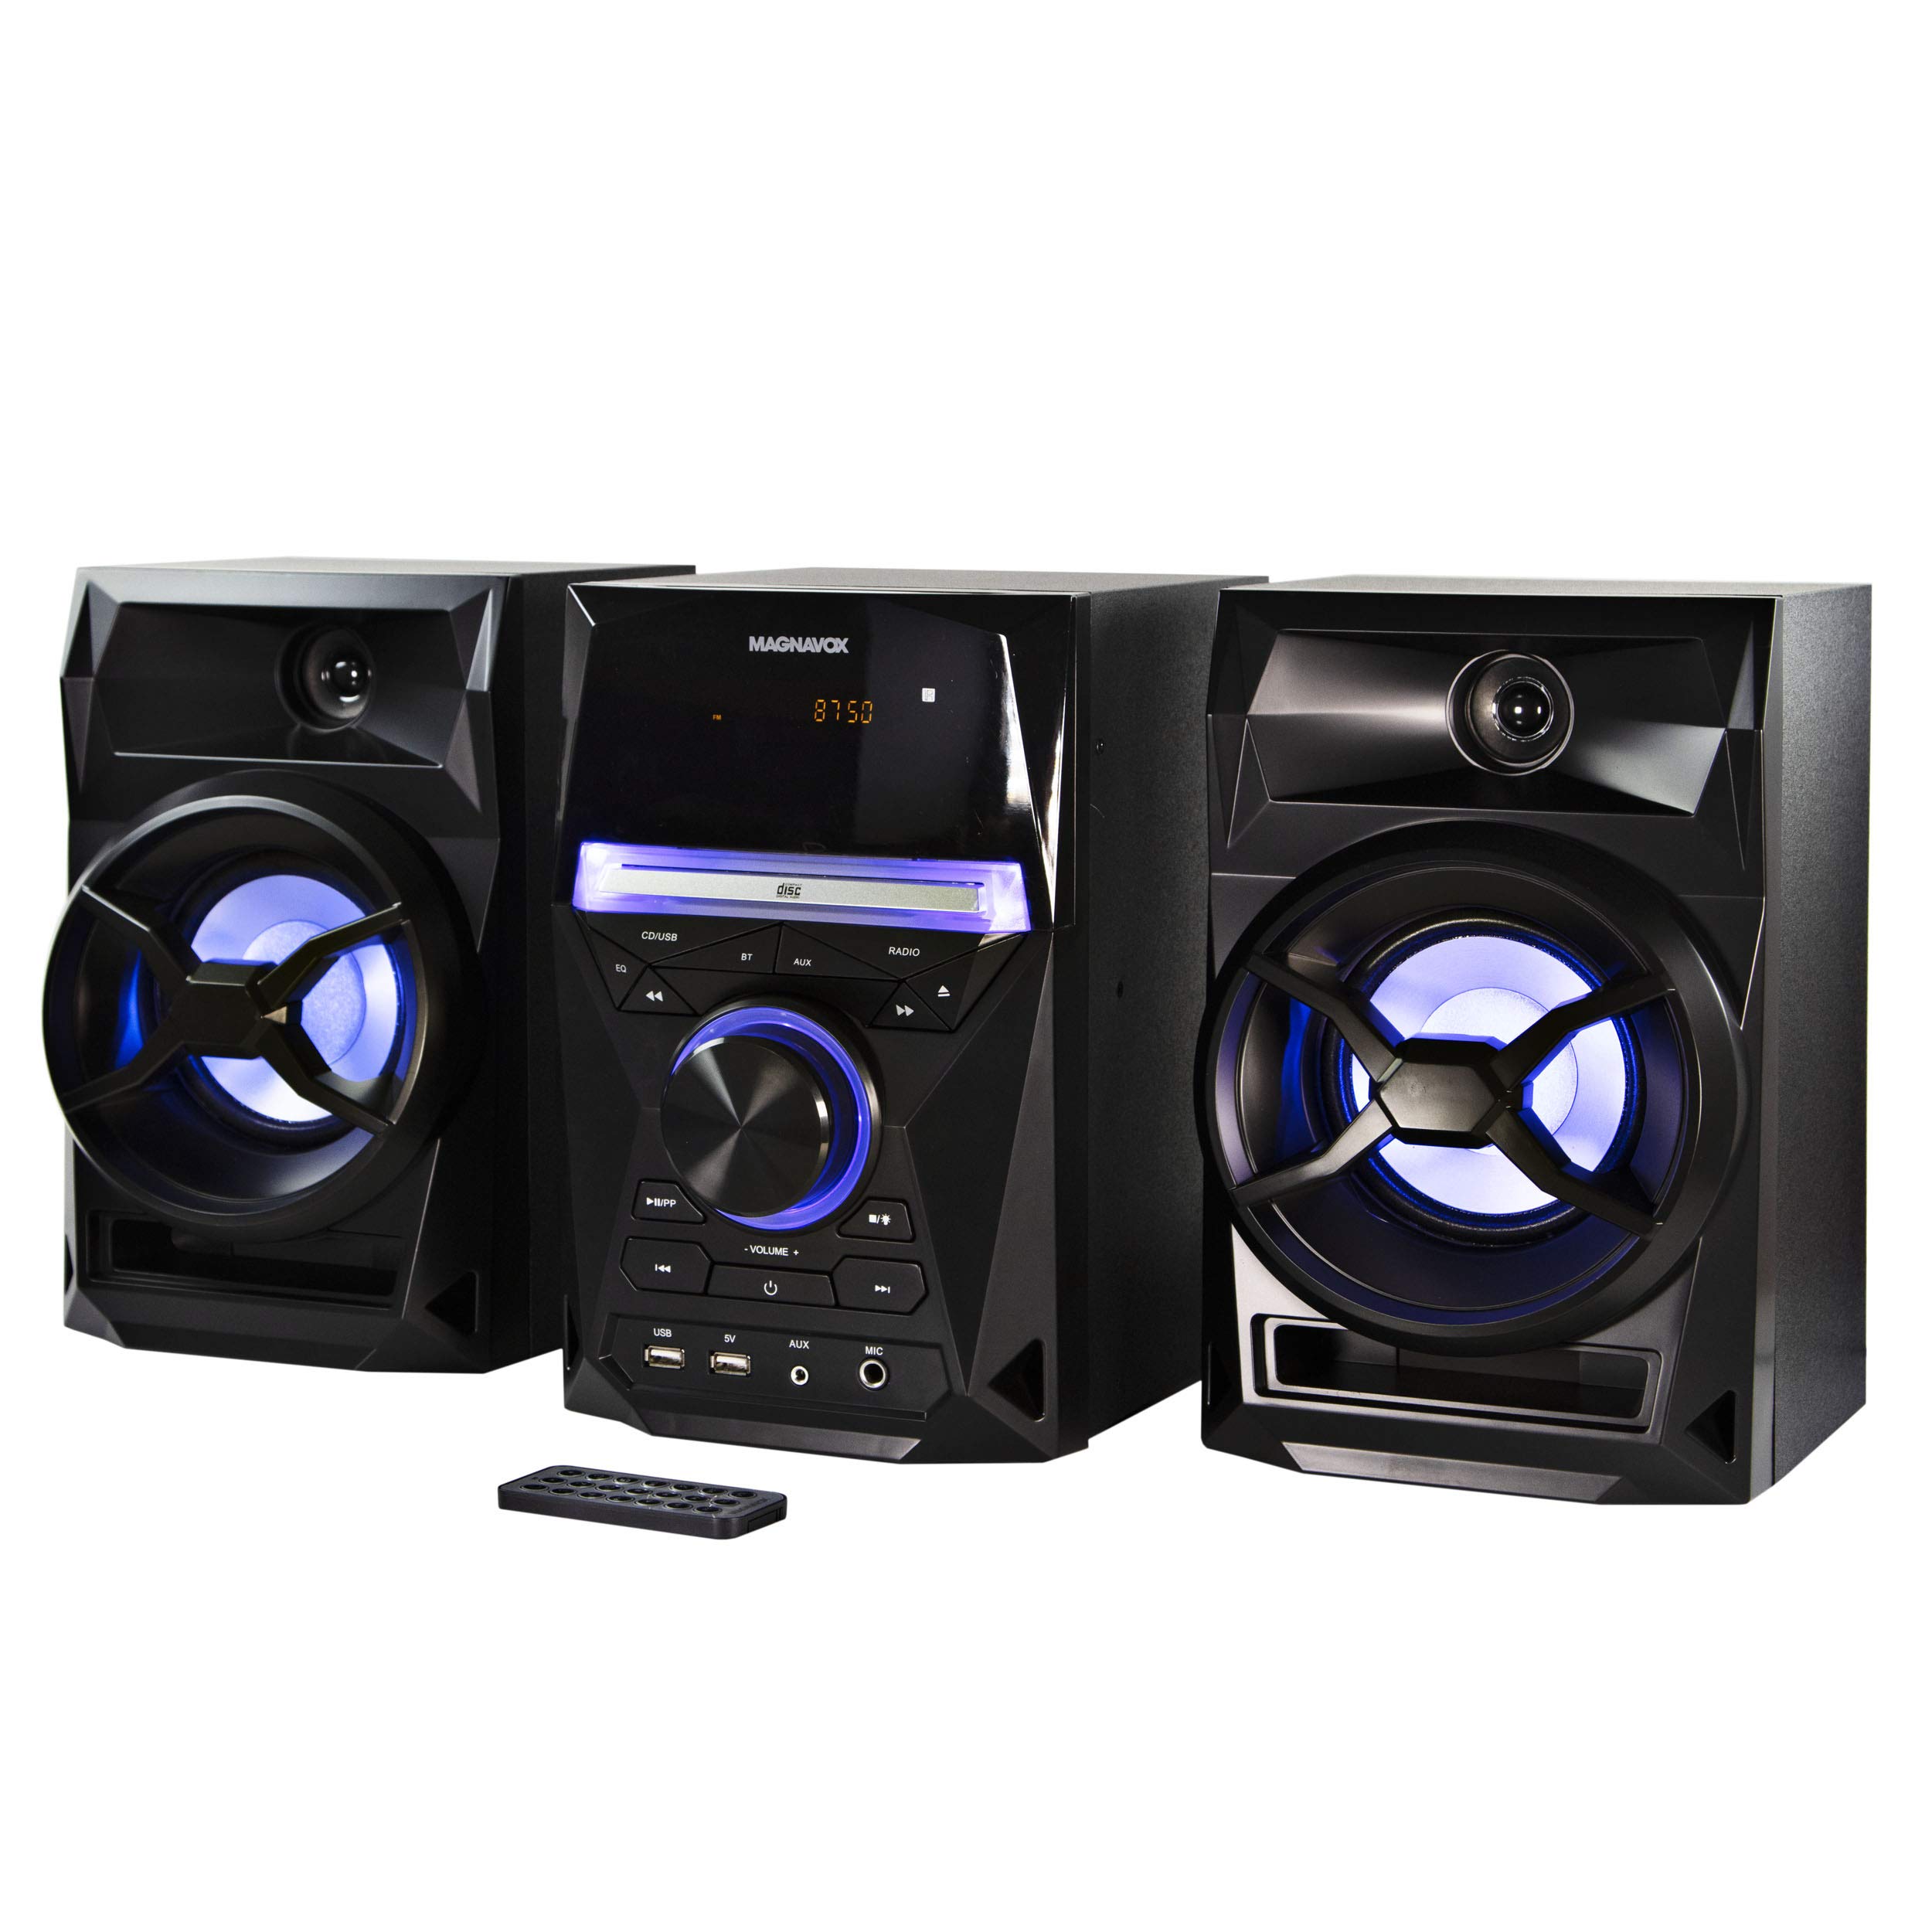 Magnavox MM441 3-Piece CD Shelf System with Digital PLL FM Stereo Radio, Bluetooth Wireless Technology, and Remote Control in Black | Blue Colored Speaker Lights | LED Display | AUX Port Compatible |